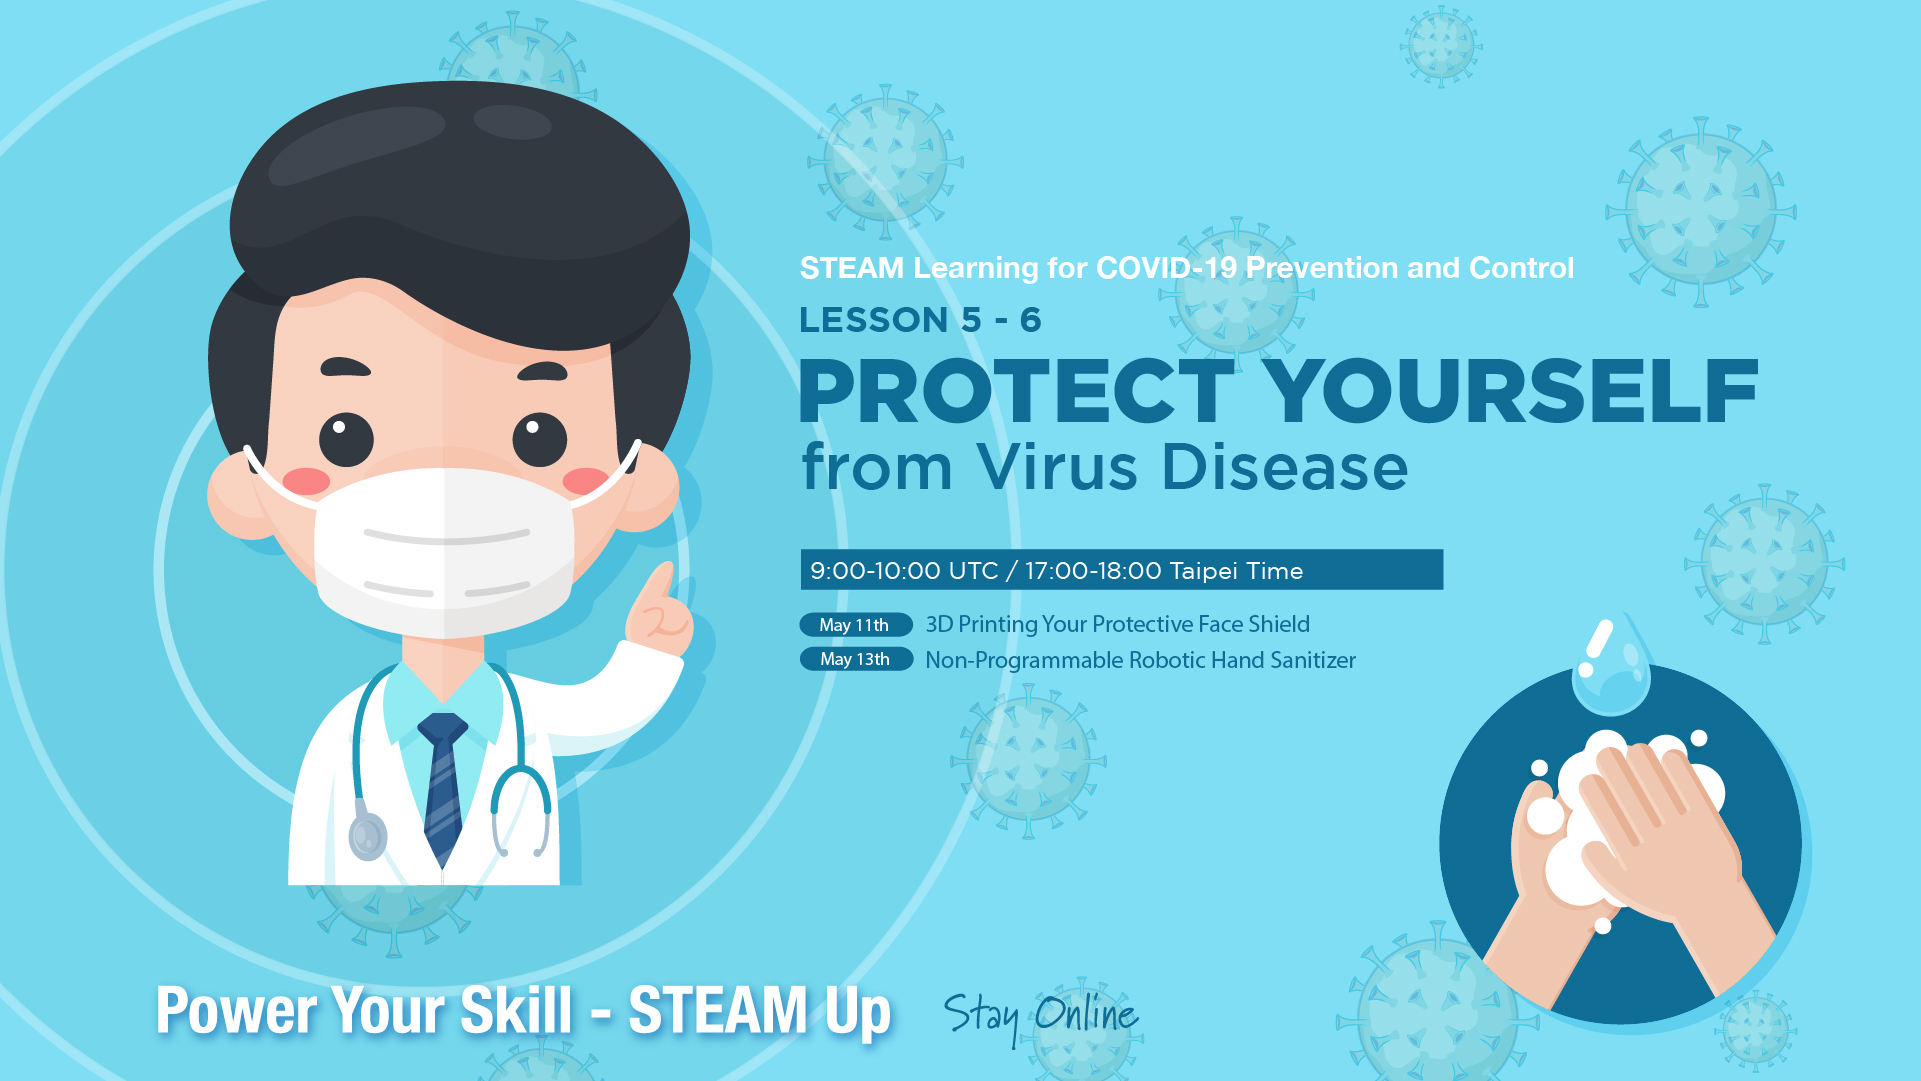 Protect Yourself from Virus Disease